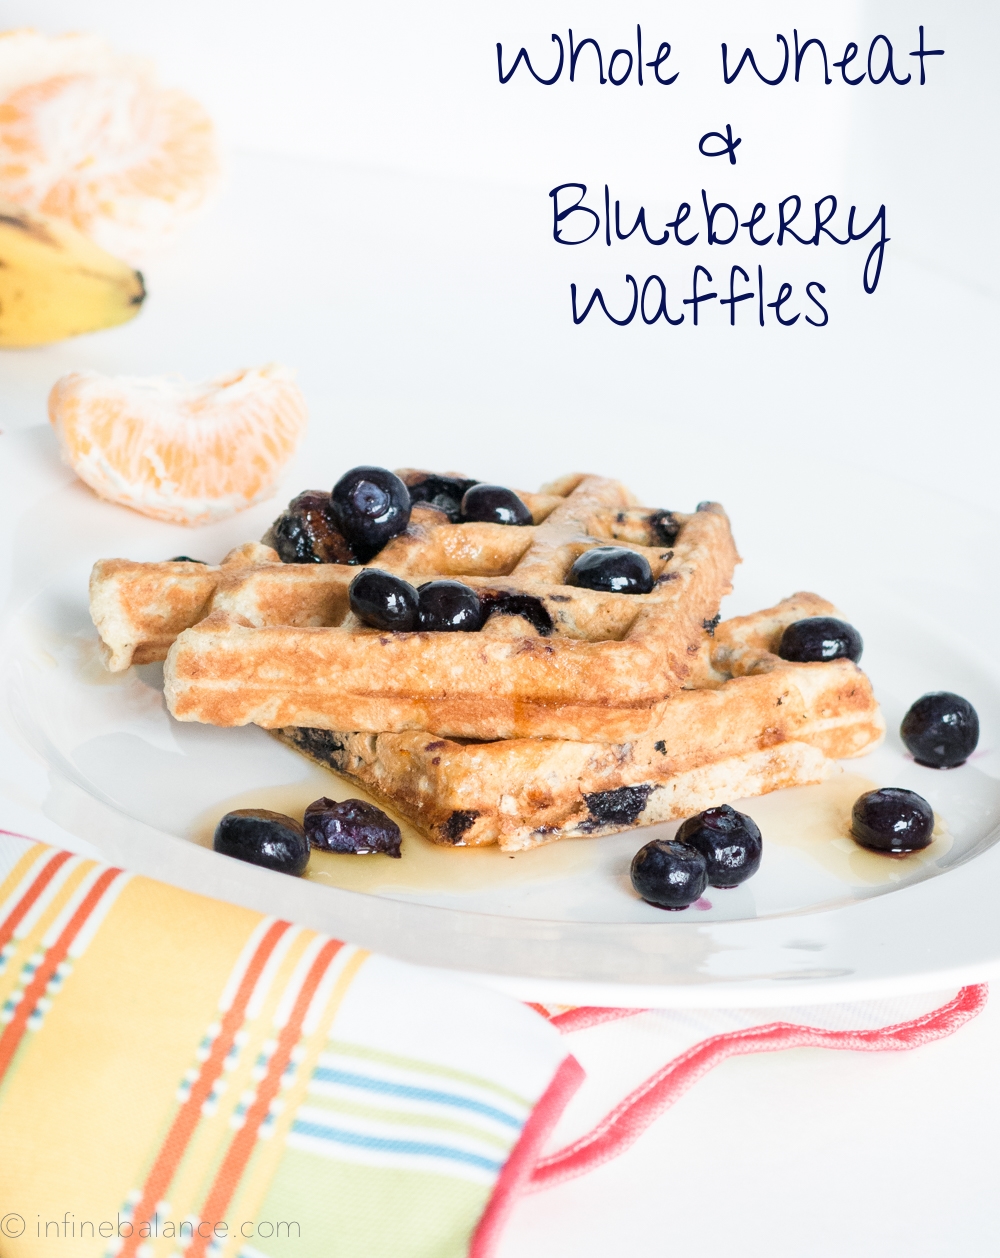 Whole Wheat and Blueberry Waffles #breakfast #recipe